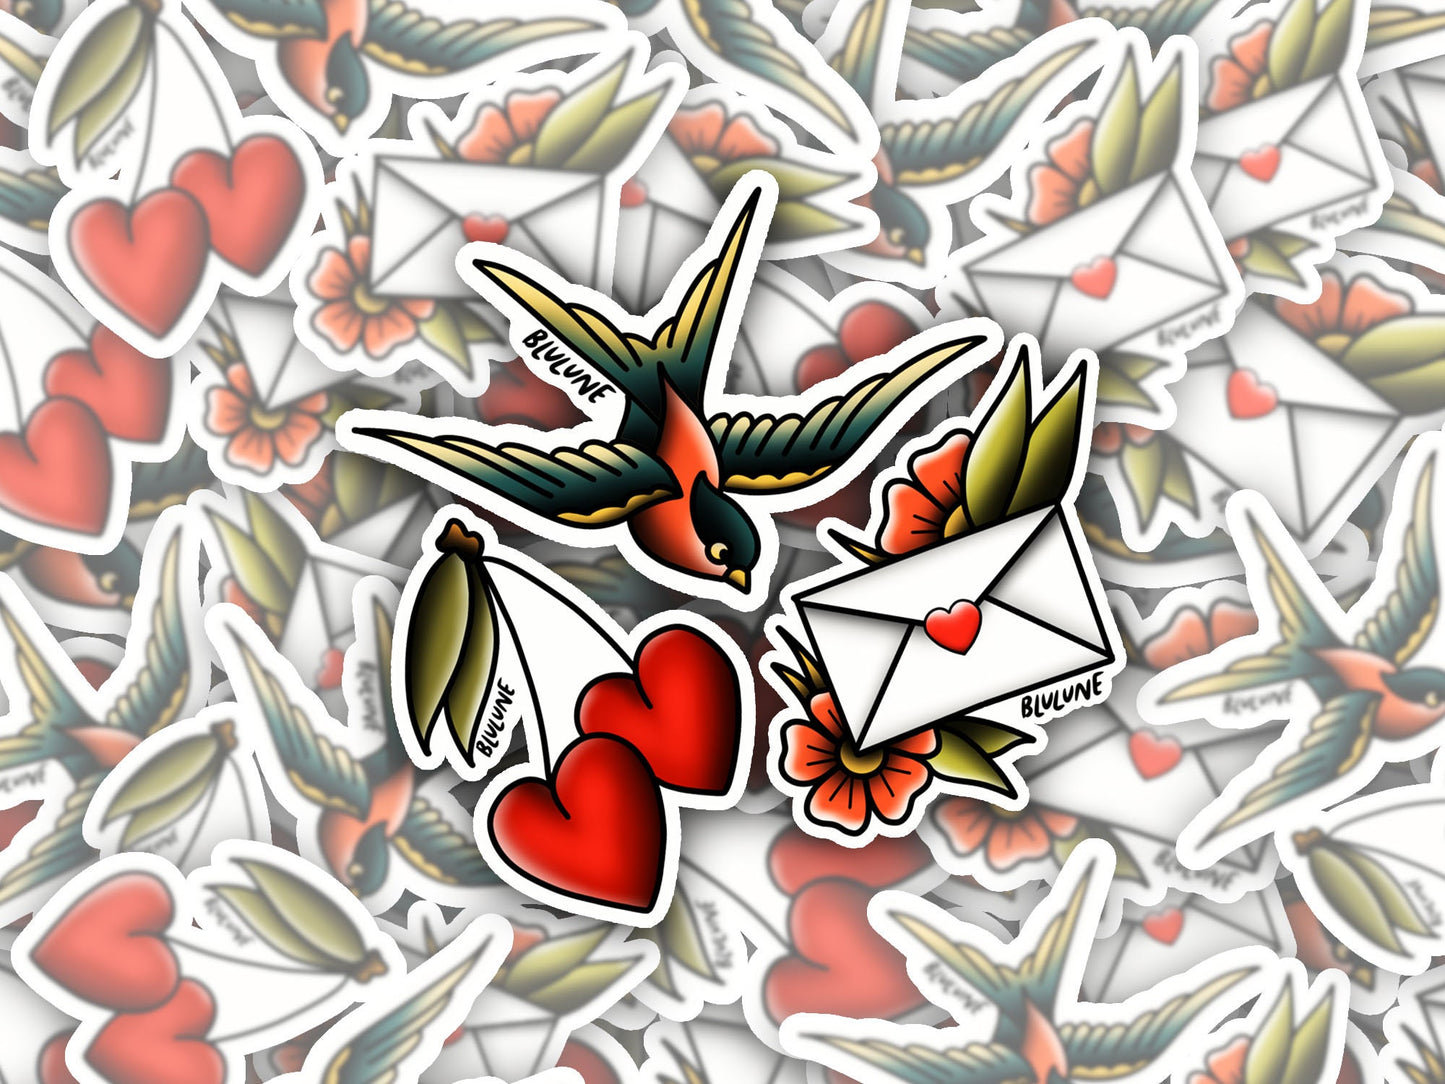 Tattoo Style Sticker Pack - Valentine Accents - Sparrow - Cherry Hearts - Love Letter